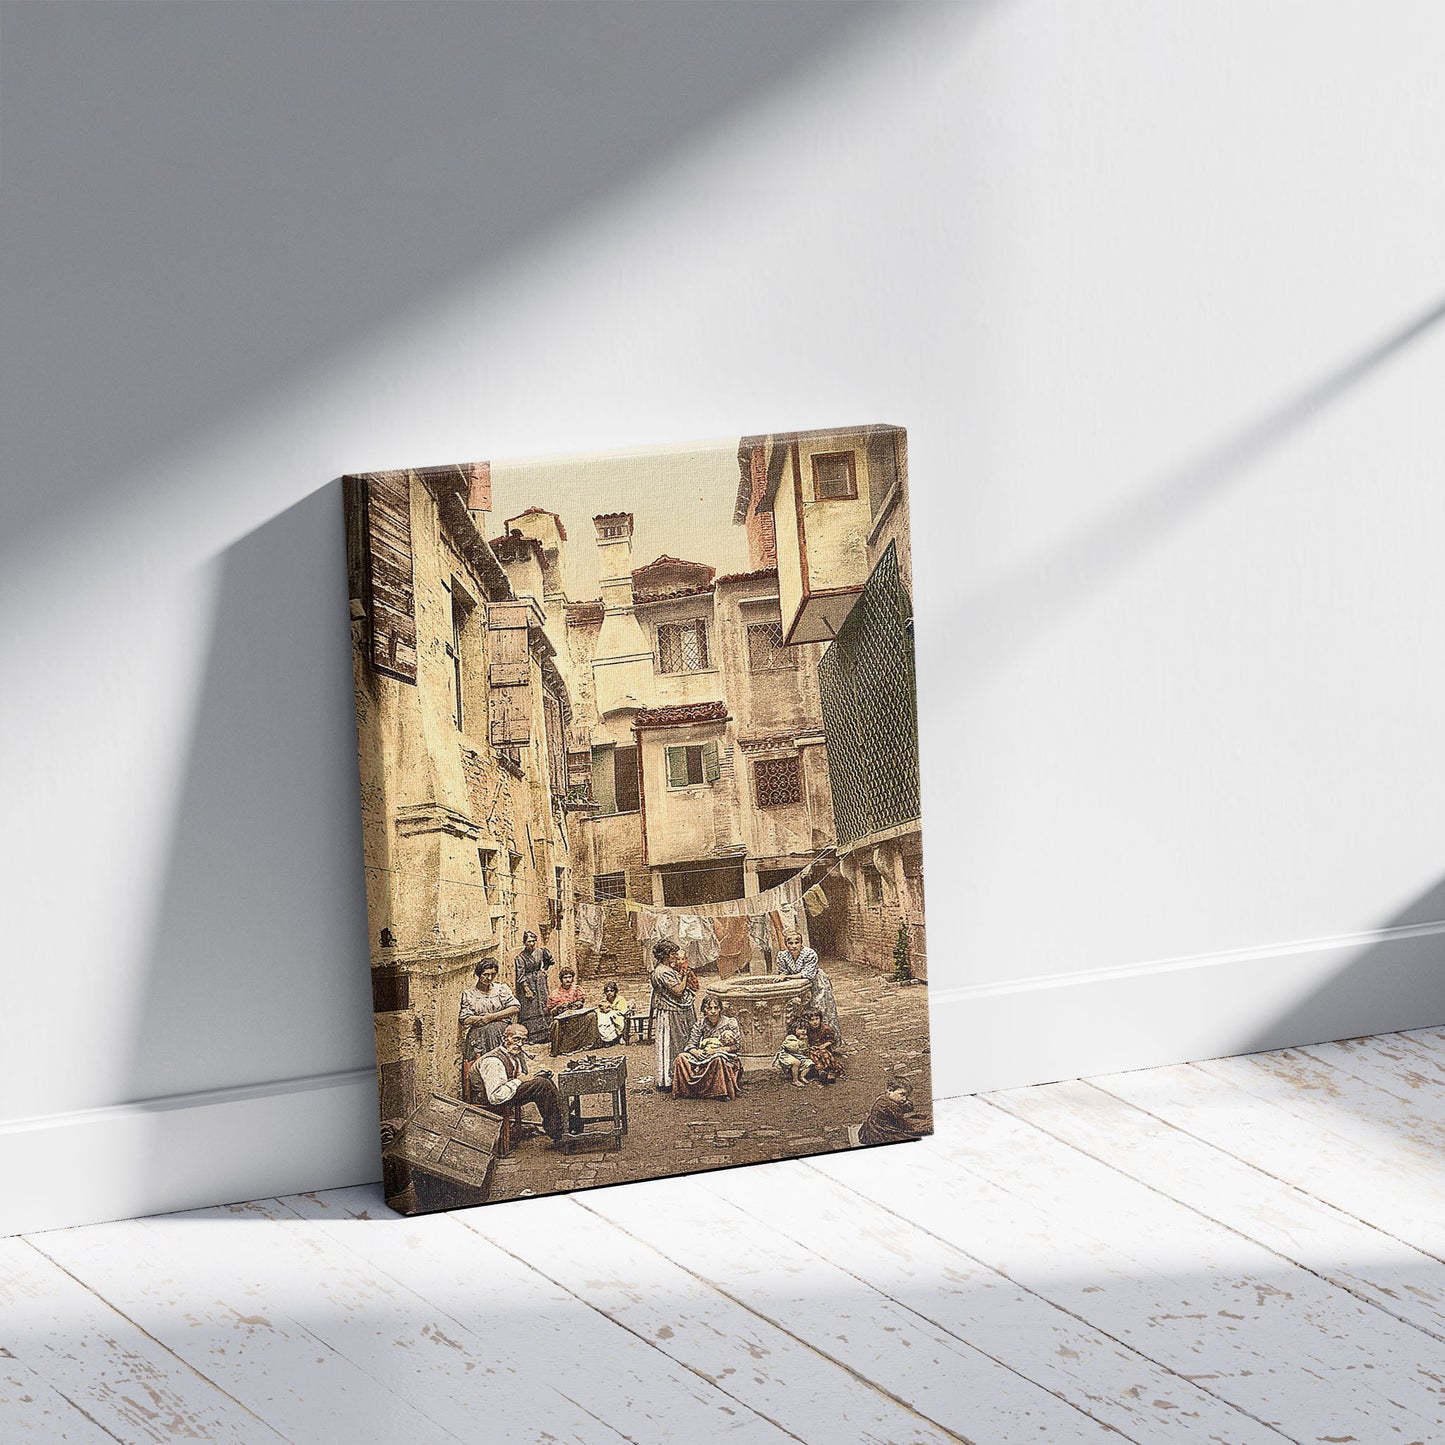 A picture of Old Venetian courtyard, Venice, Italy, a mockup of the print leaning against a wall